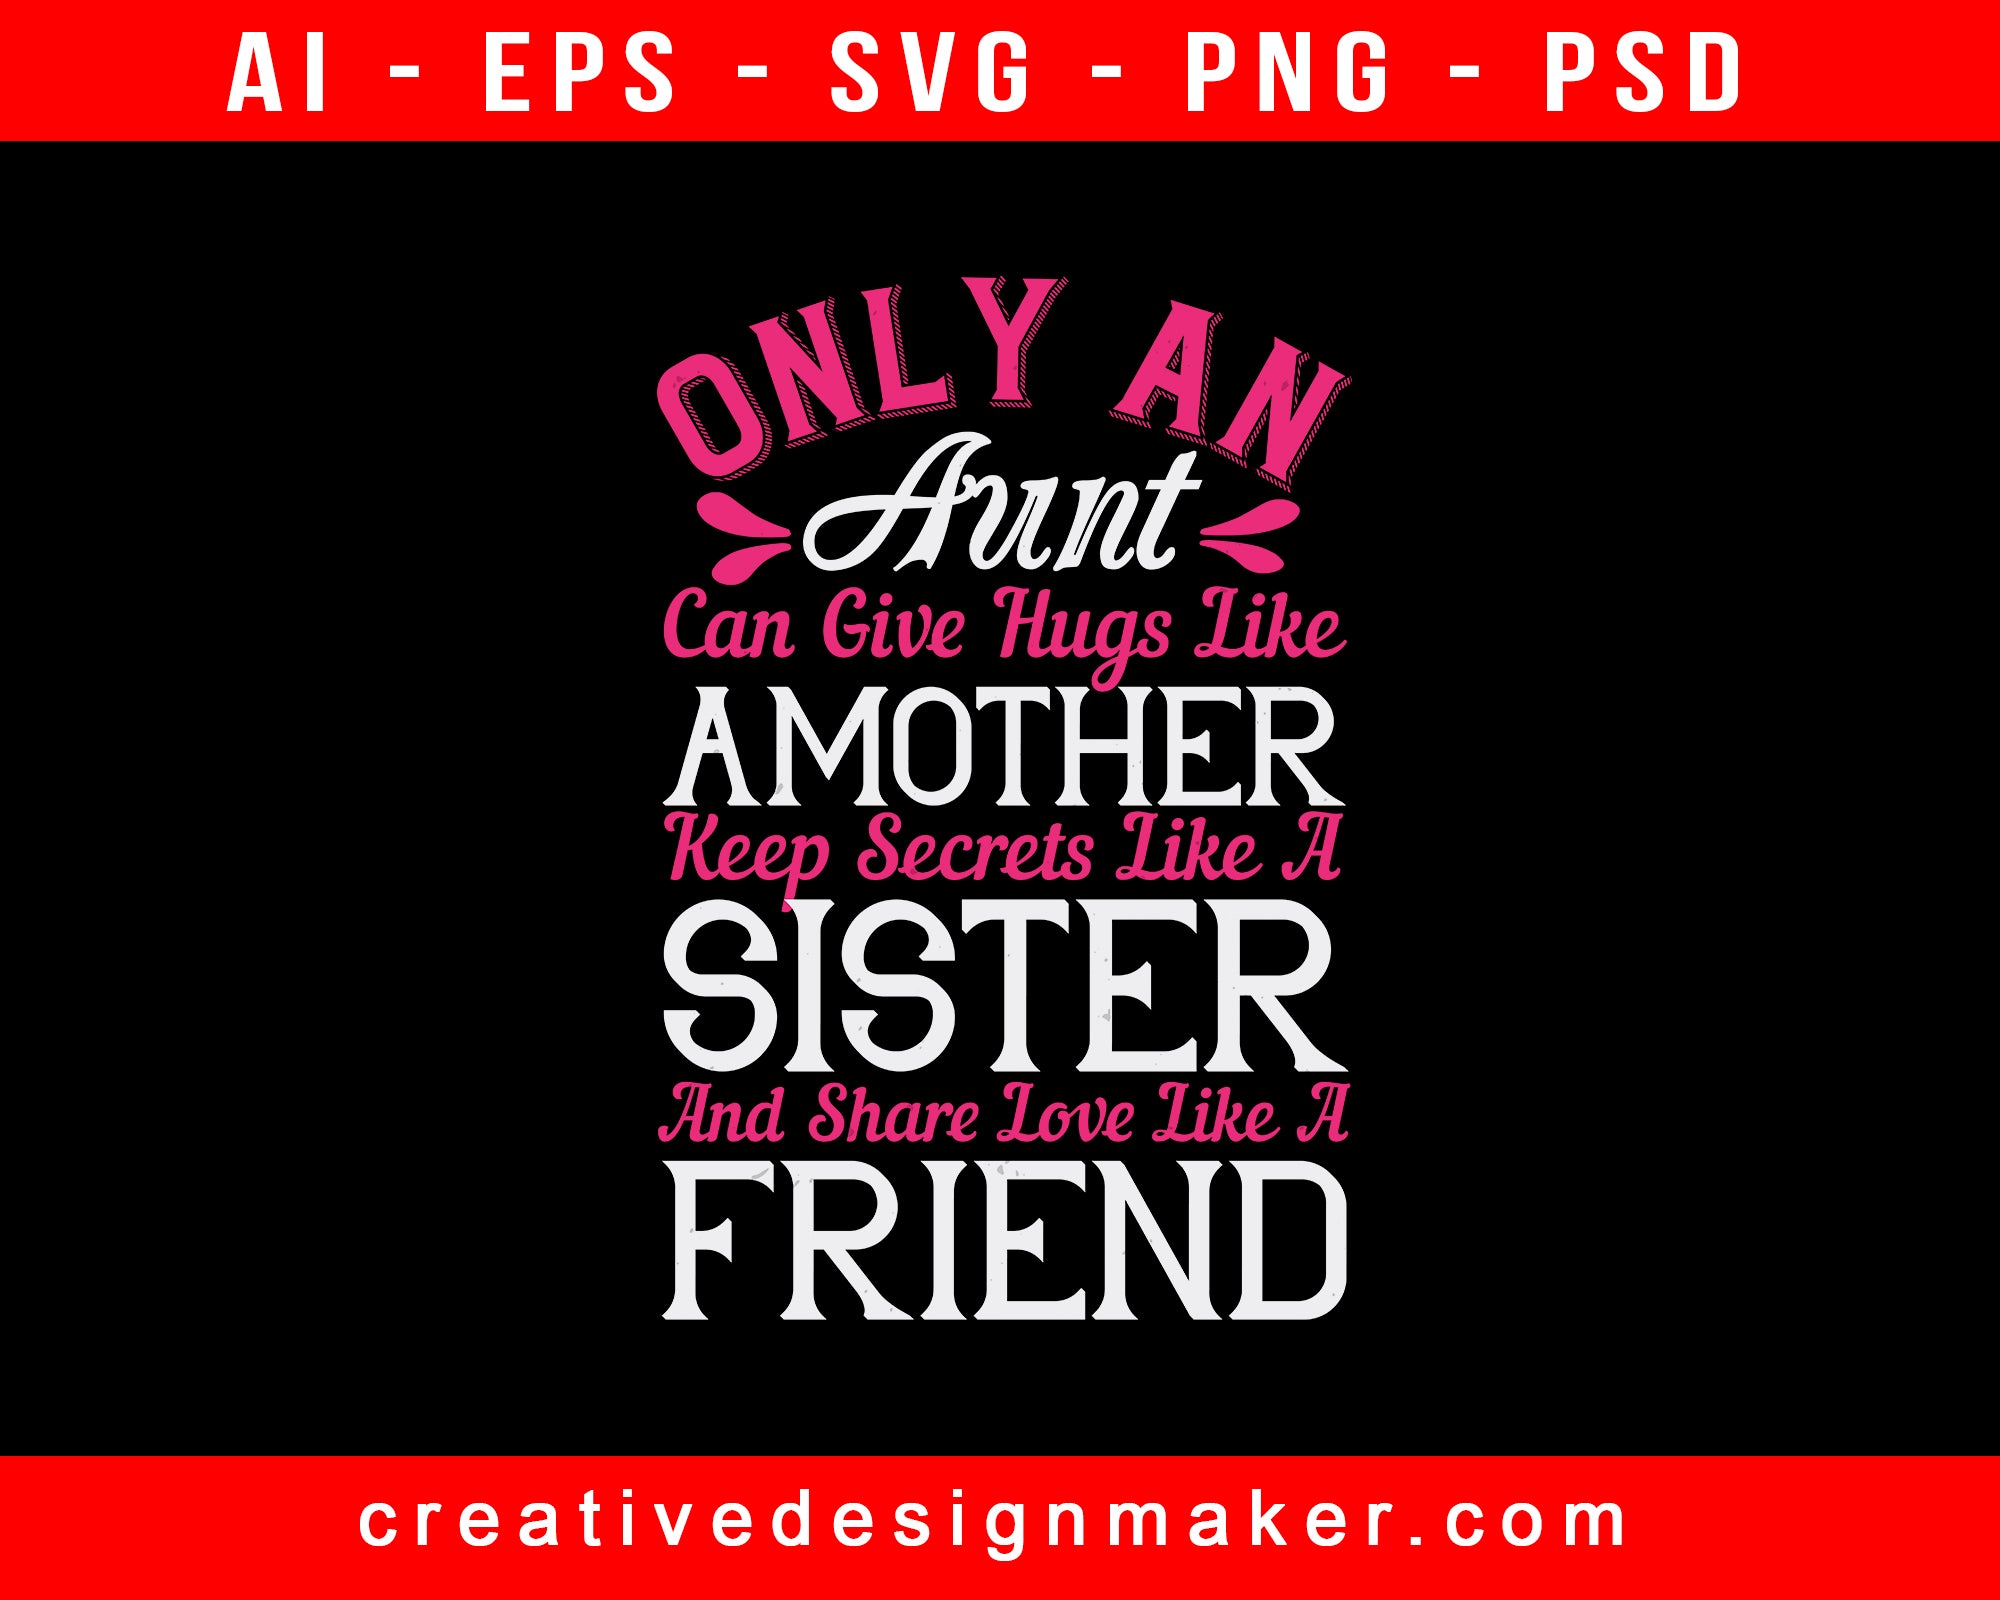 Only An Aunt Can Give Hugs Like Amother Keep Secrets Like A Sister And Share Love Like A Friend Auntie Print Ready Editable T-Shirt SVG Design!